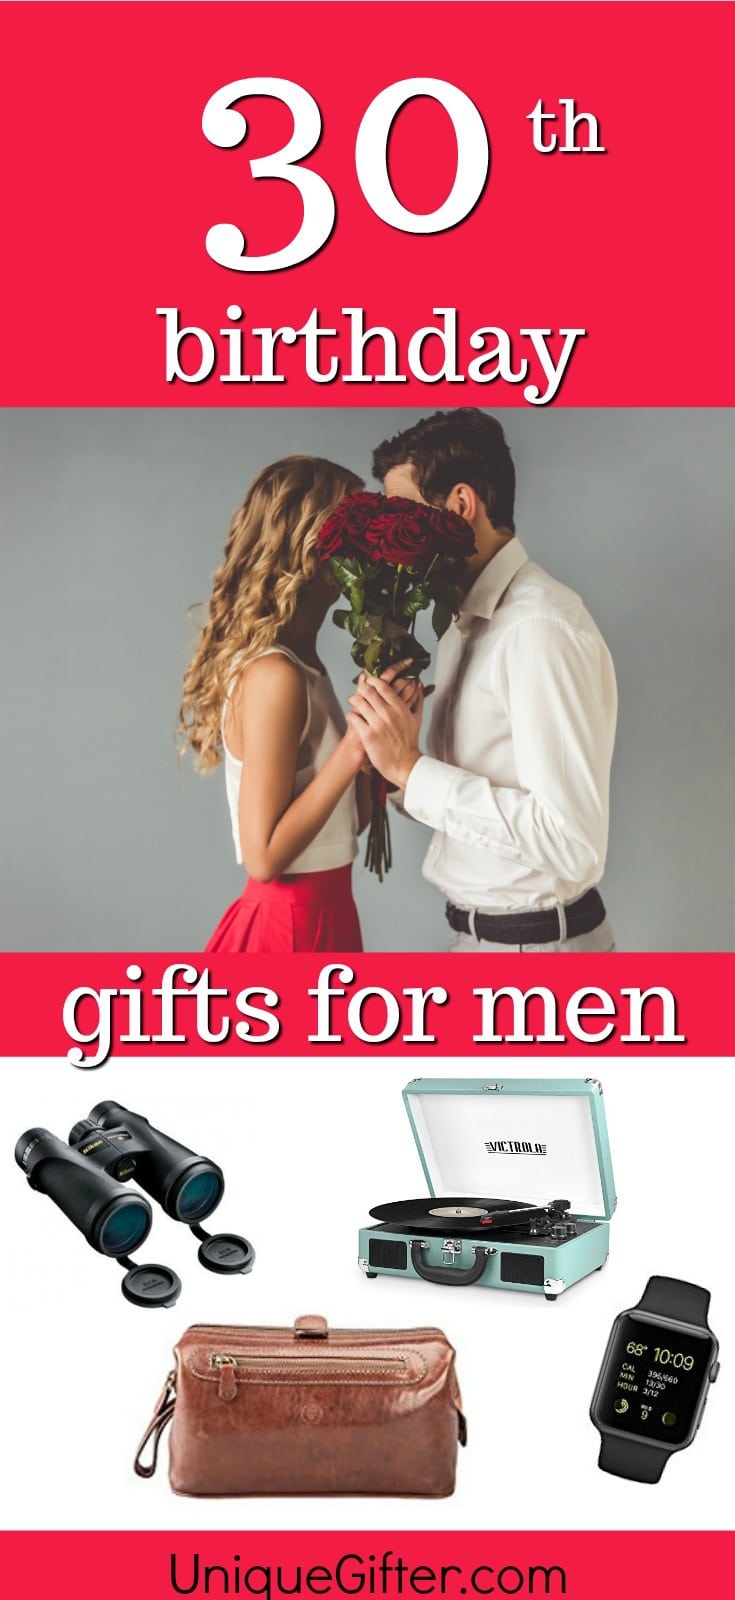 20 Gift Ideas for Your Husband's 30th Birthday Unique Gifter